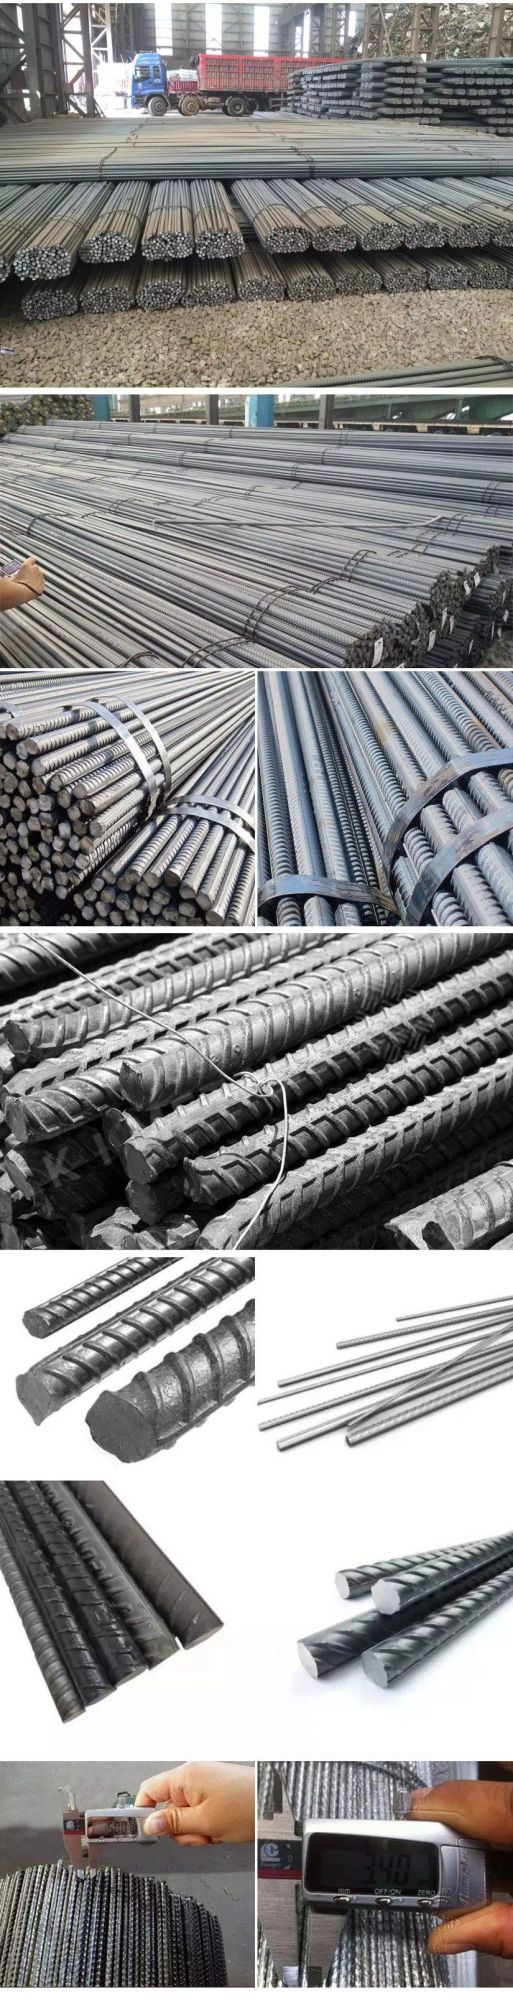 China Steel Rebars Supplier Best Quality Iron Rod Size Customized